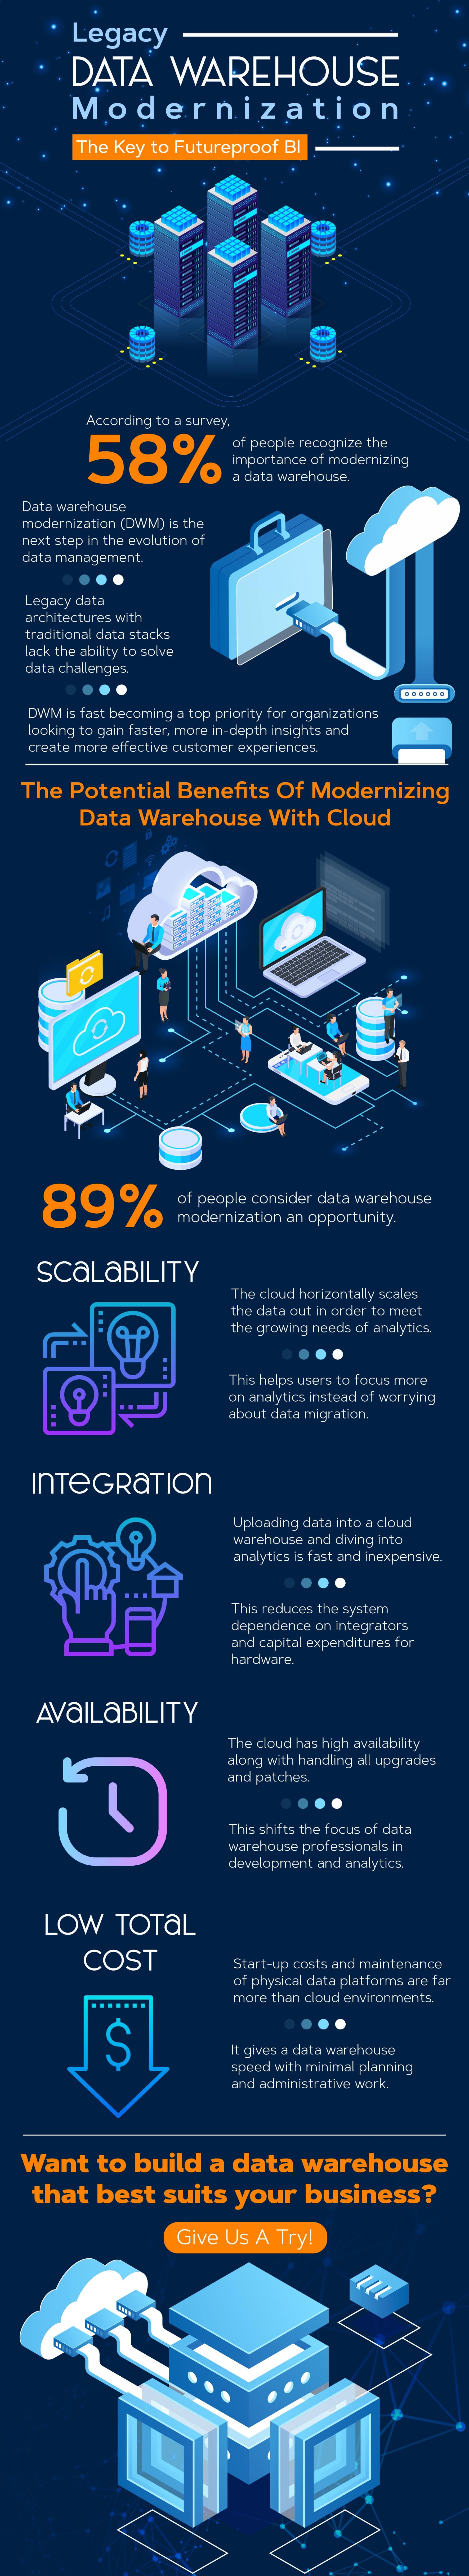 Infographic for Legacy Data Warehouse Modernization that shows statistics and facts